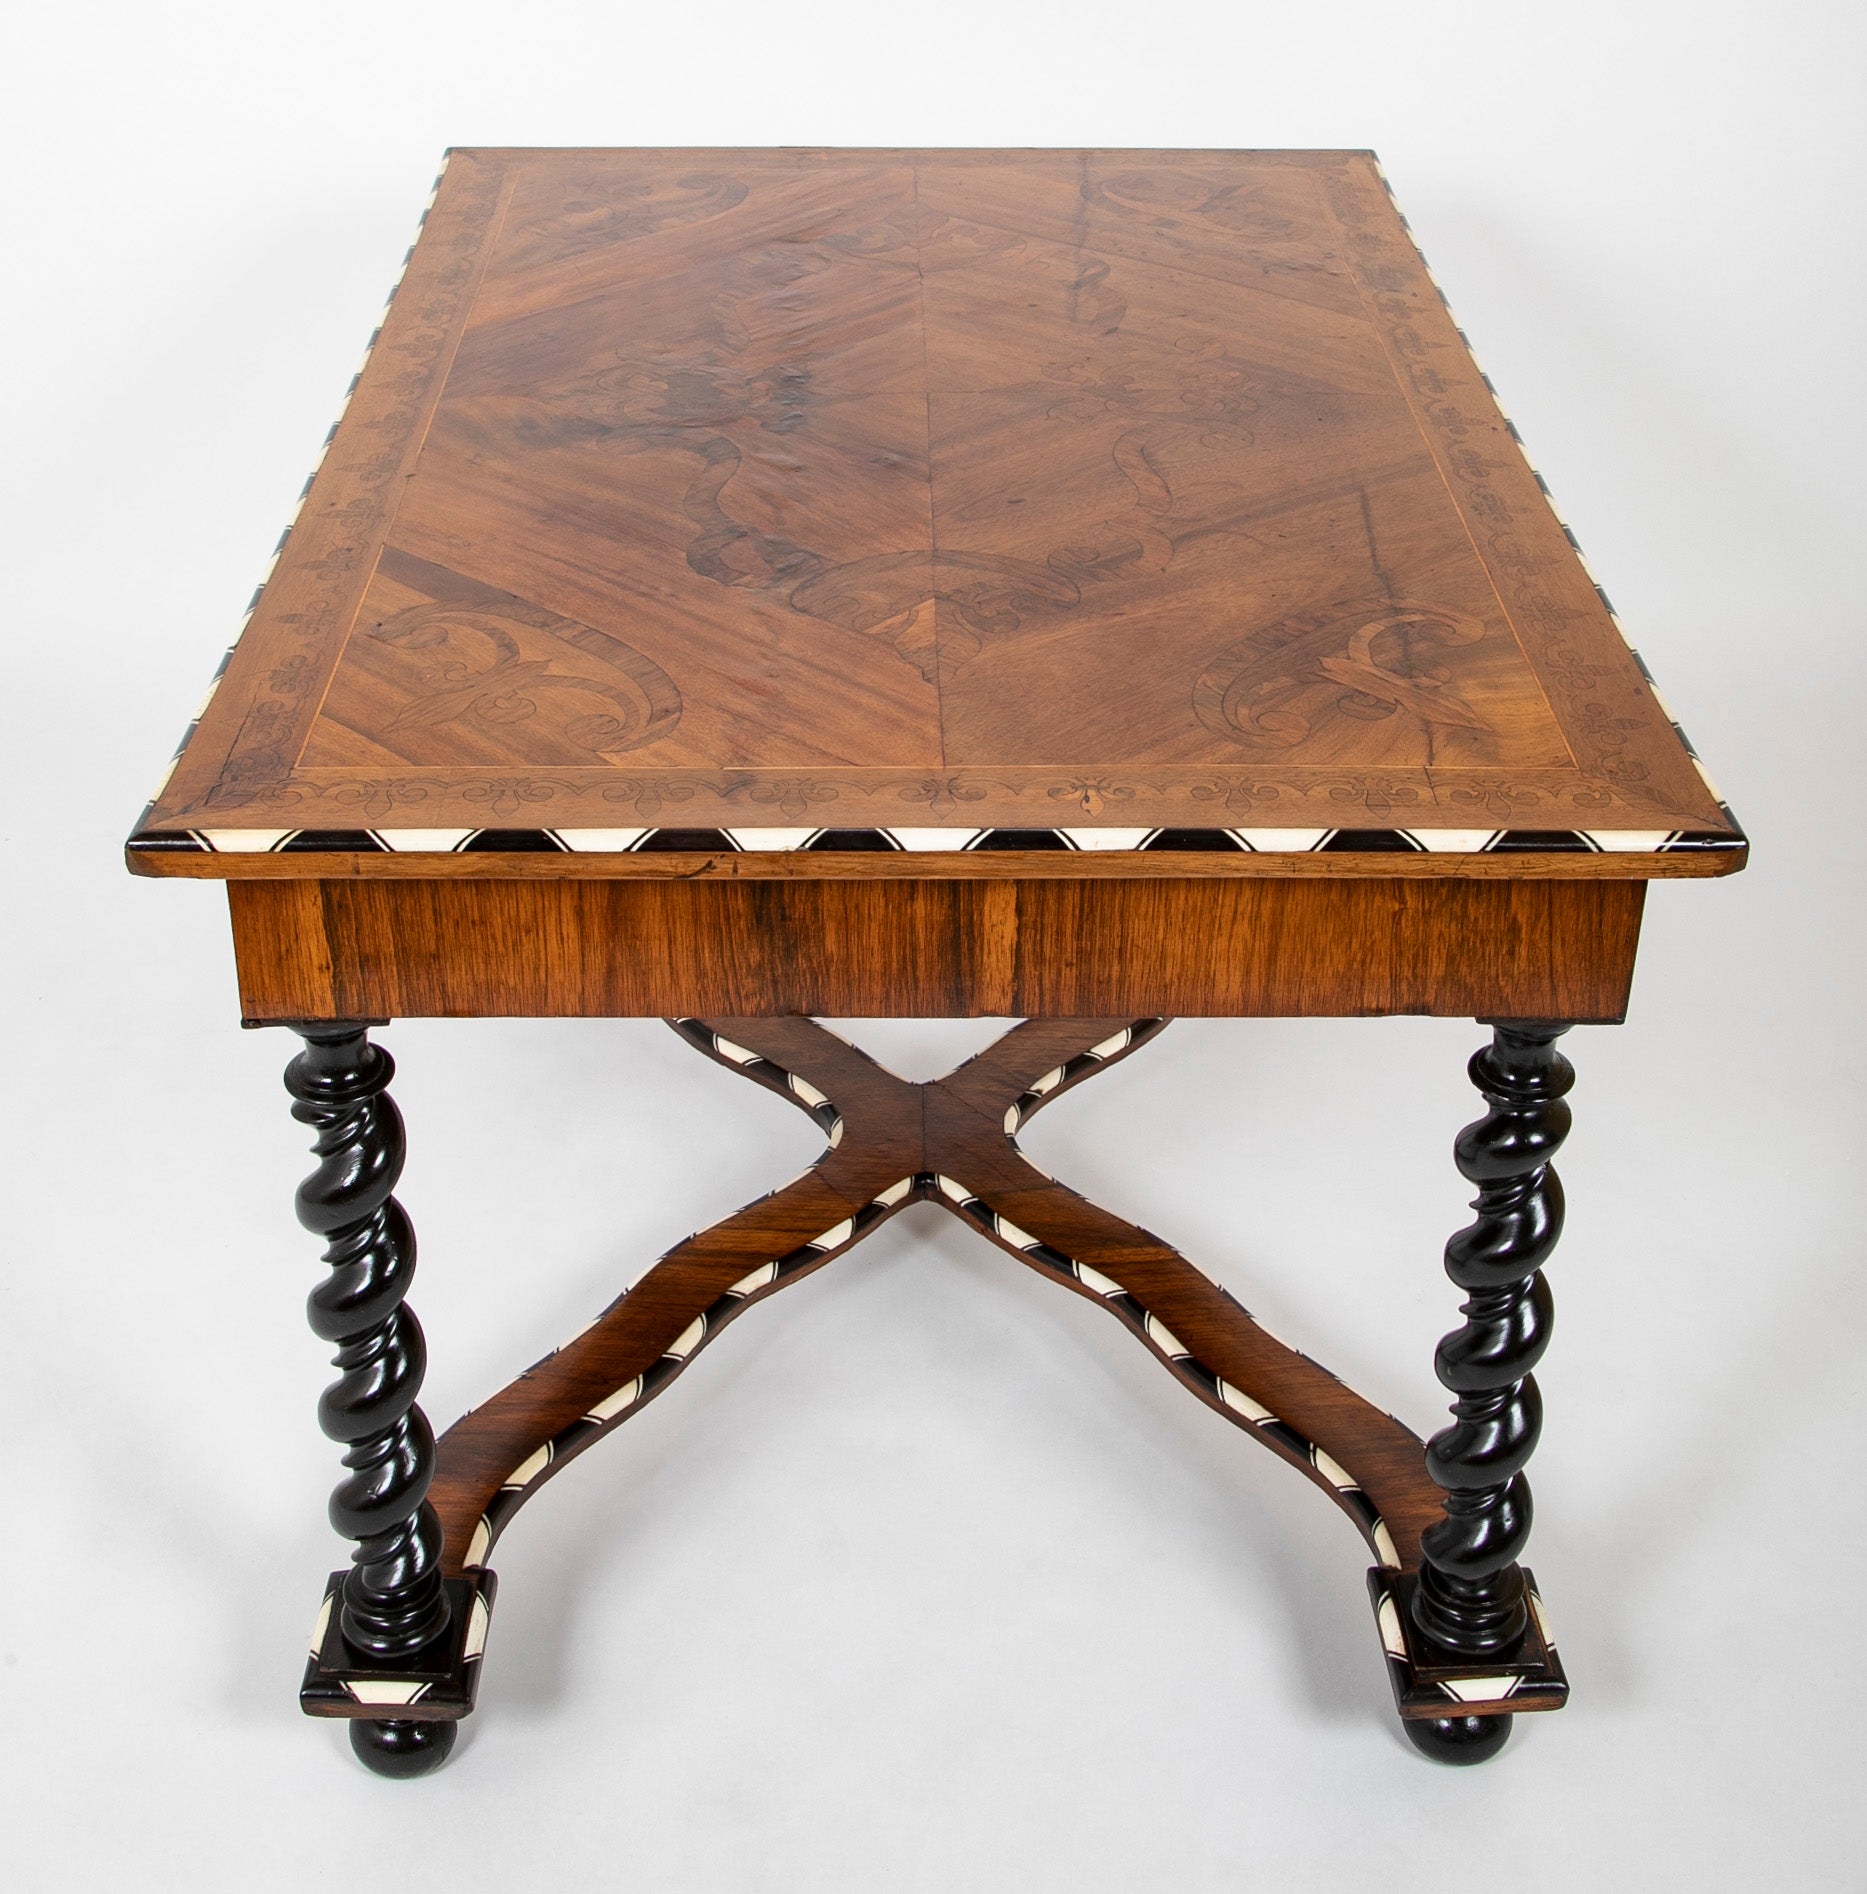 Baroque Renaissance Center Table in Italian Walnut with Marquetry Top